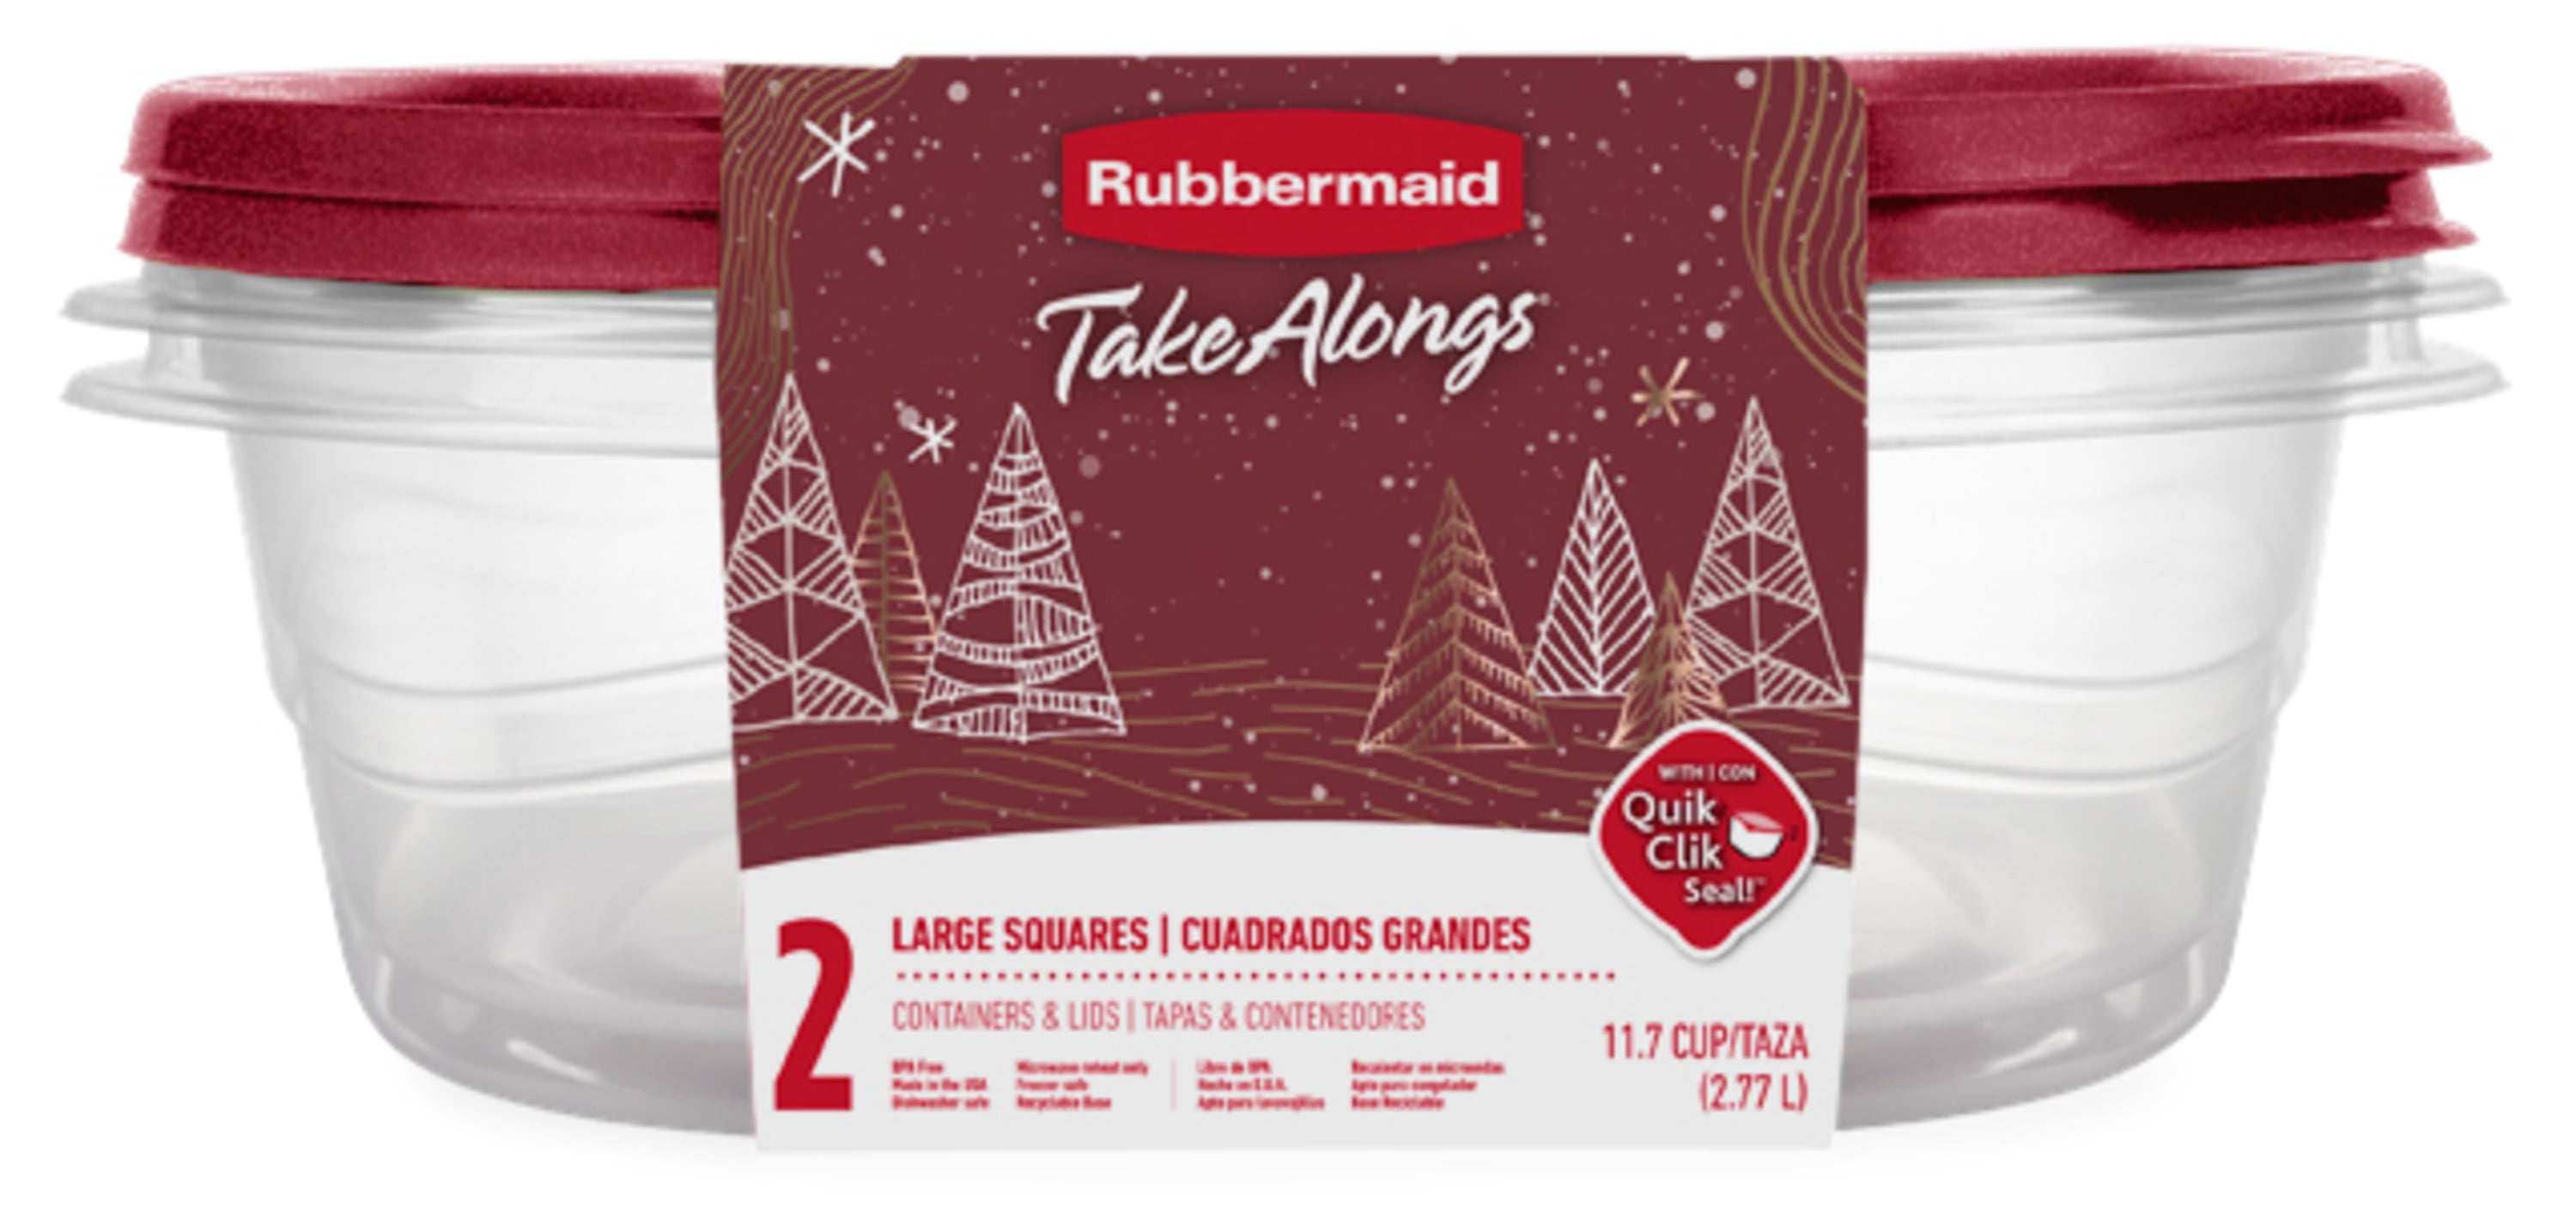 Rubbermaid TakeAlongs 11.7 Cup Food Storage Containers, Set of 2, Rhubarb Red